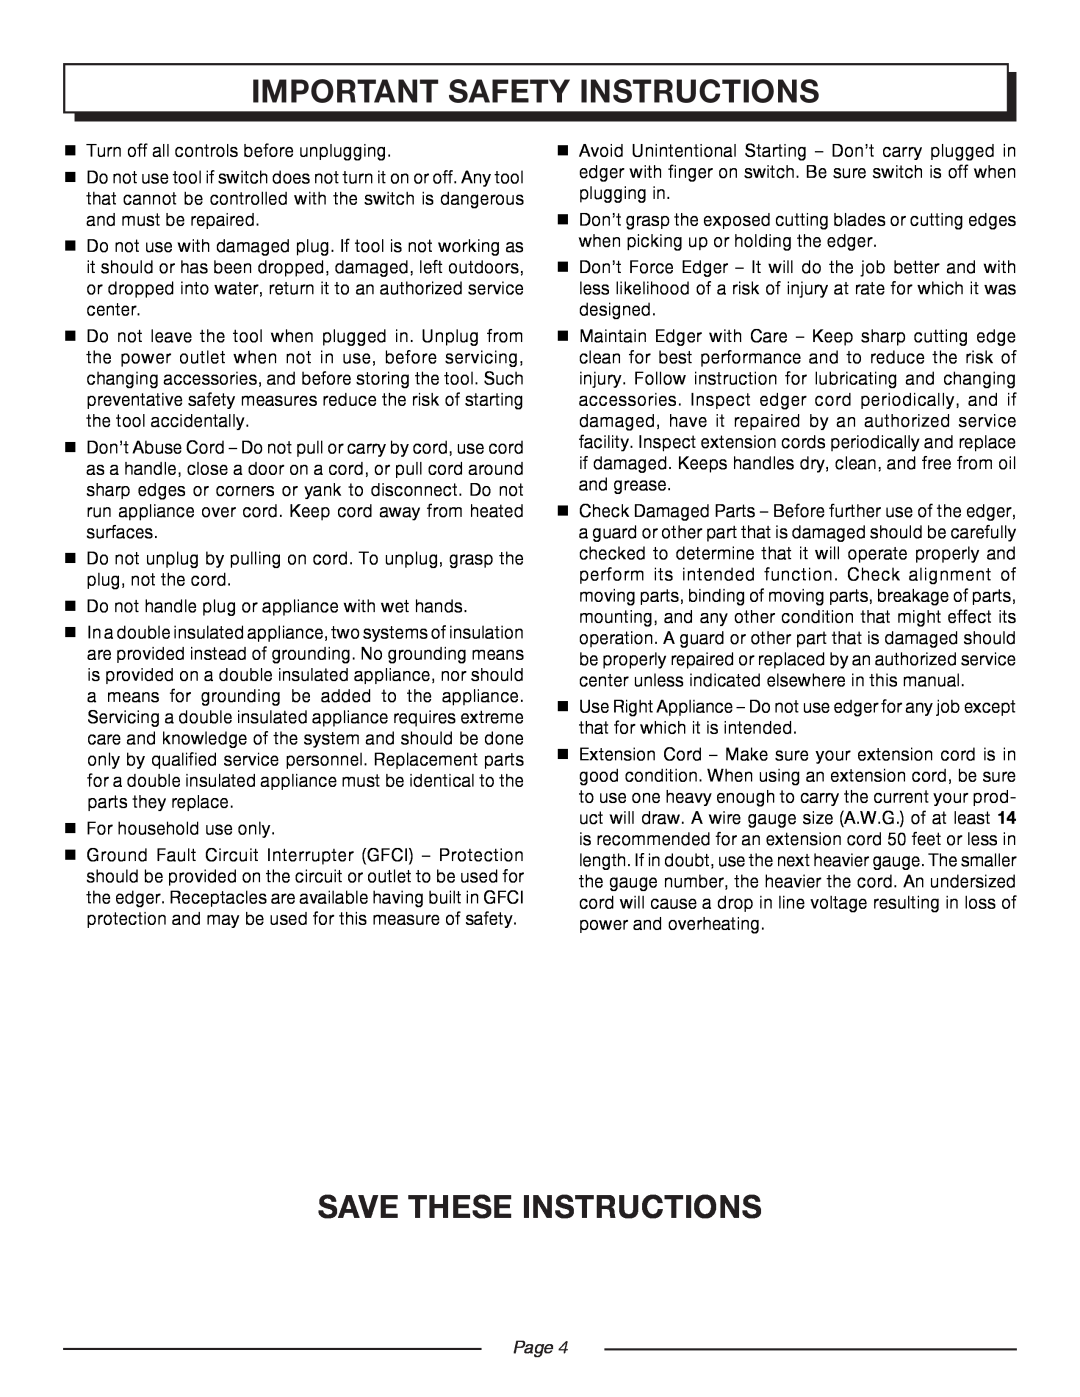 Homelite UT45100 Save These Instructions, important safety instructions,  Turn off all controls before unplugging, Page  